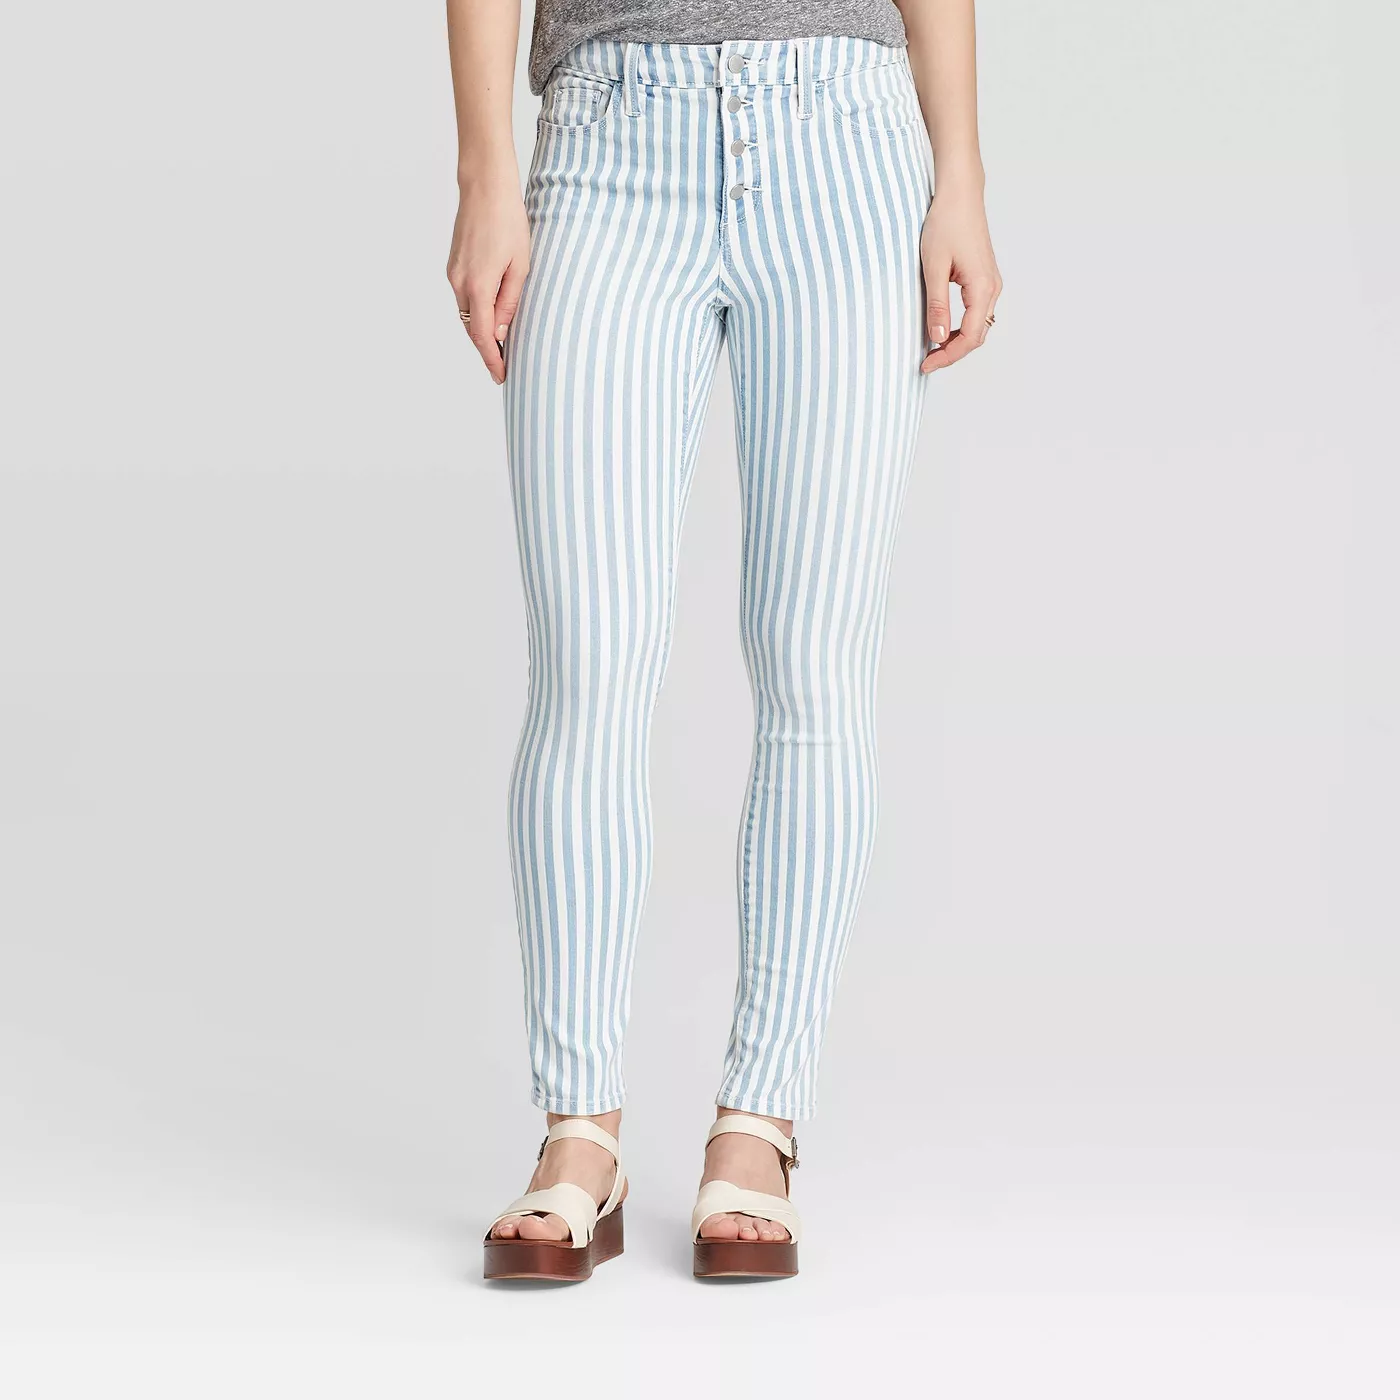 Women's High-Rise Striped Skinny Ankle Jeans - Universal Thread™ Light Blue - image 1 of 6